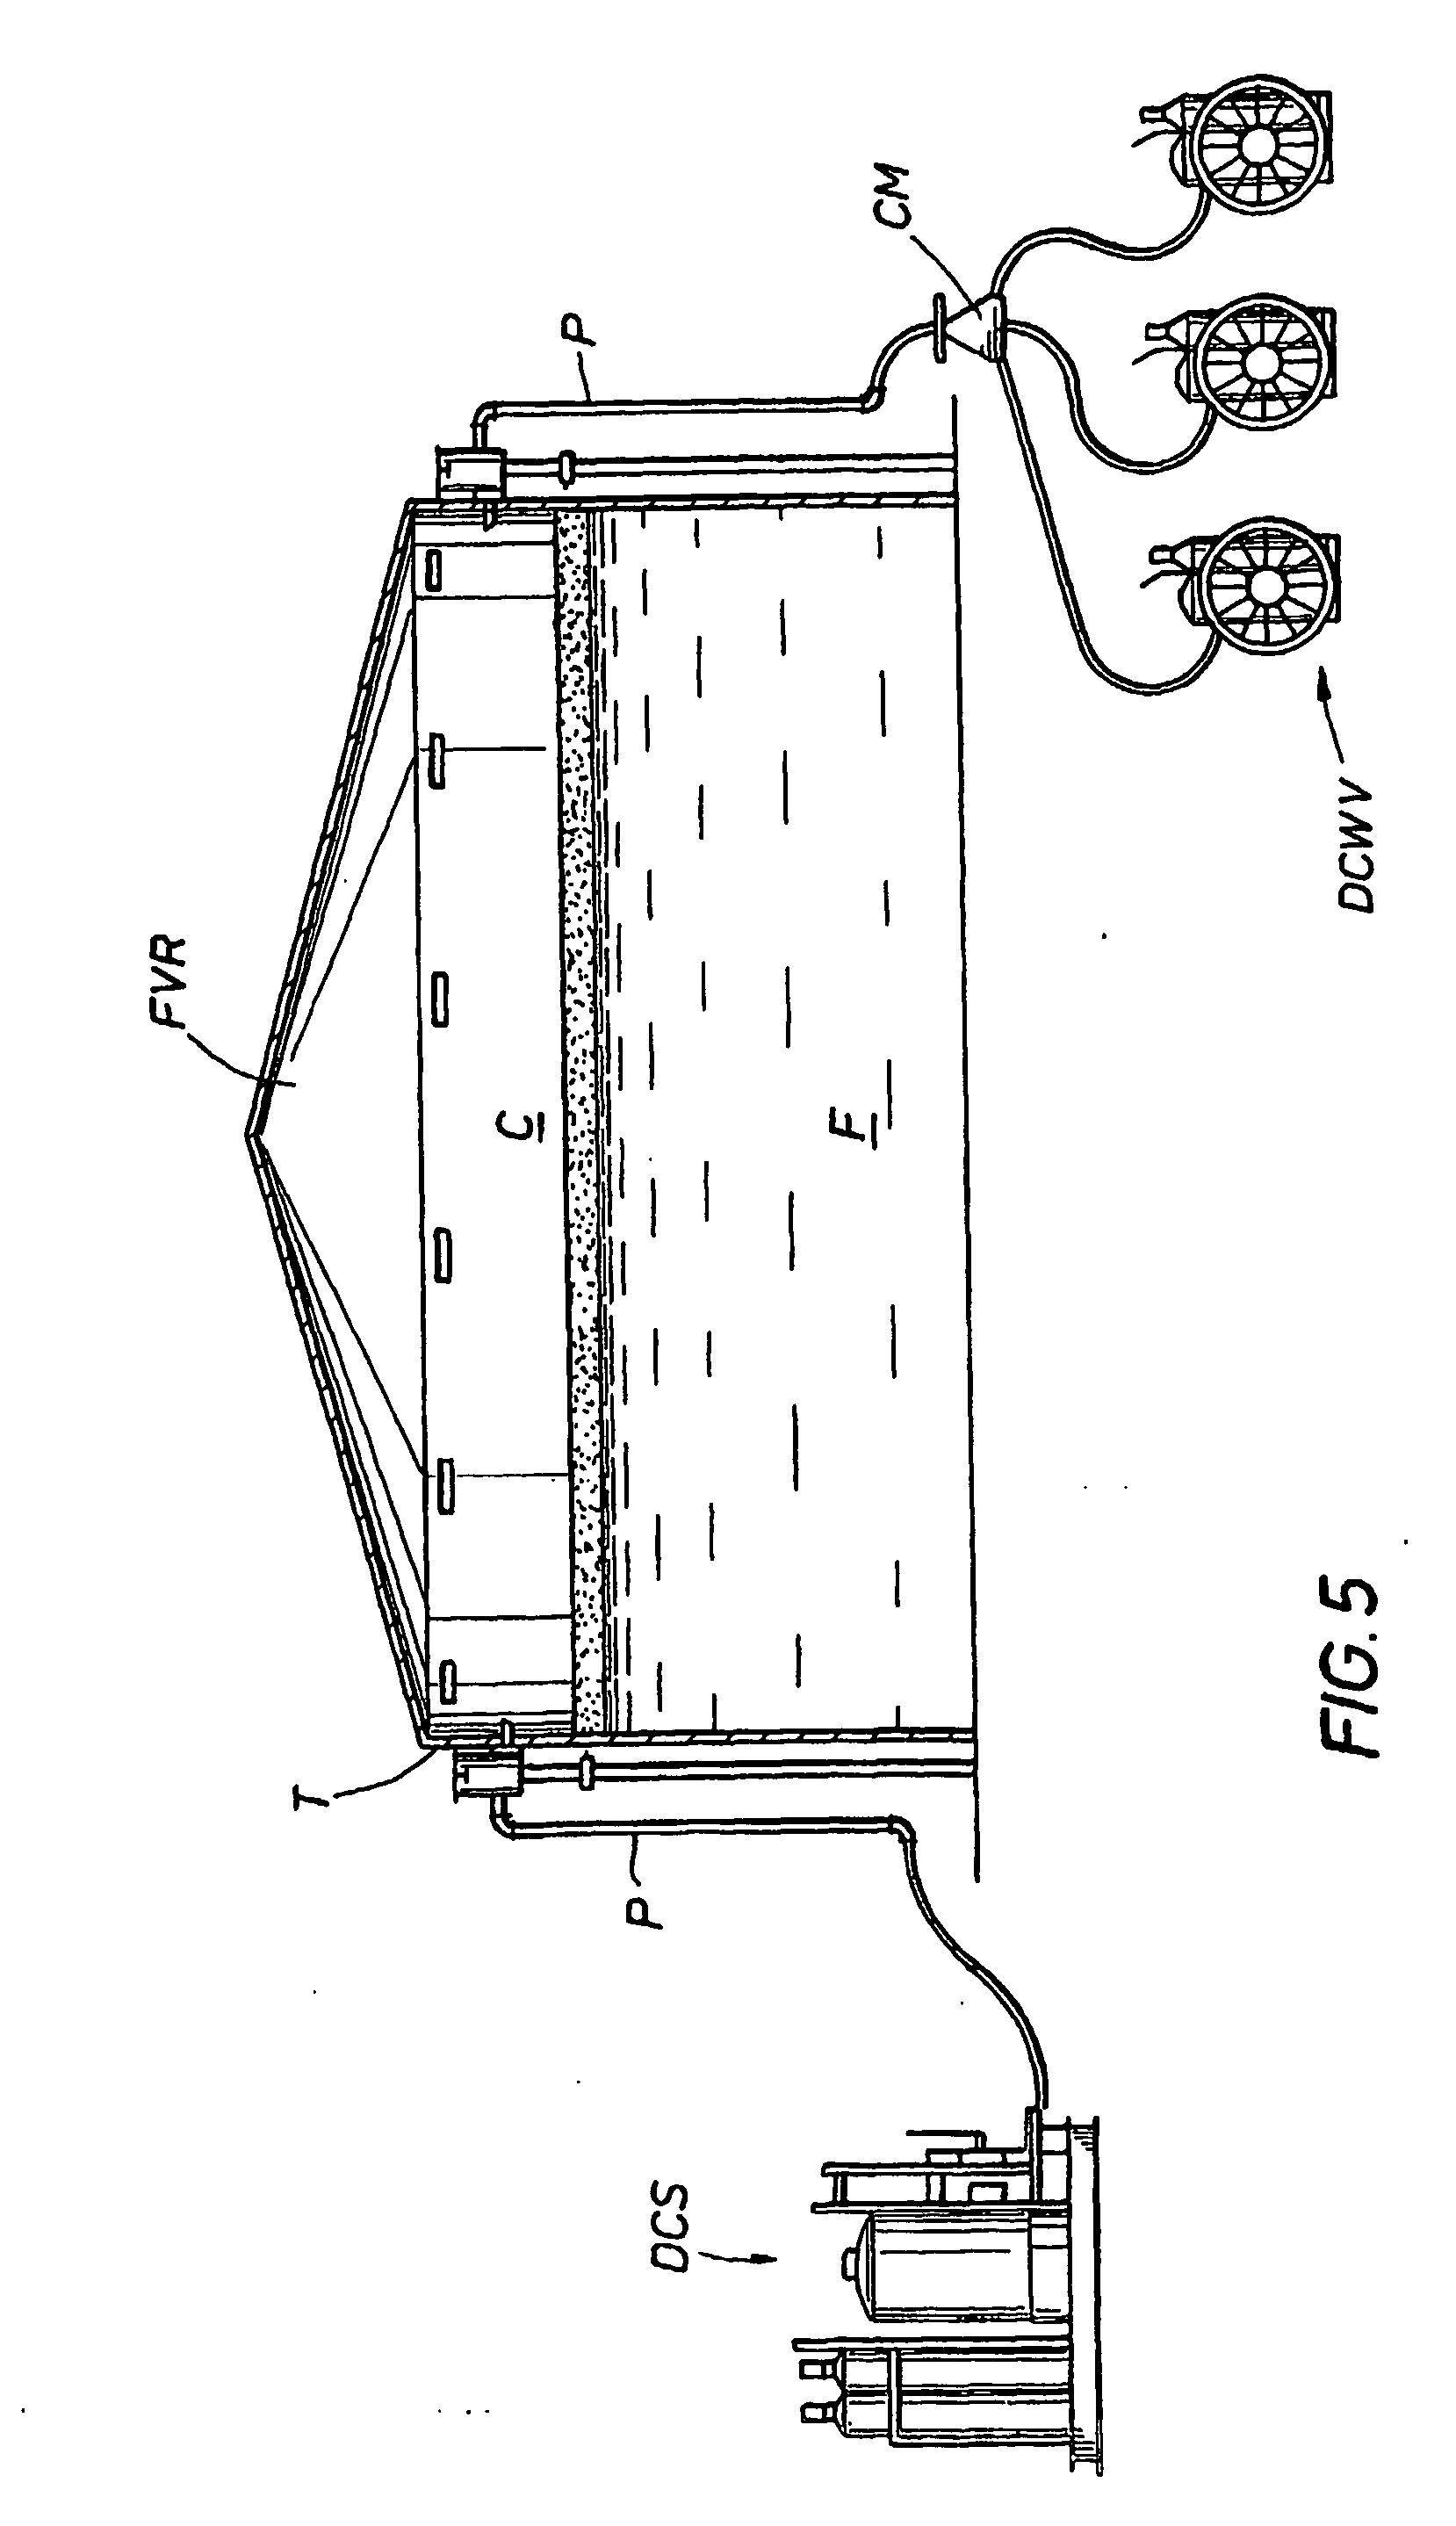 Dry chemical system for extinguishing difficult fuel or flammable liquid fires in an industrial tank with a roof creating space above the liquid